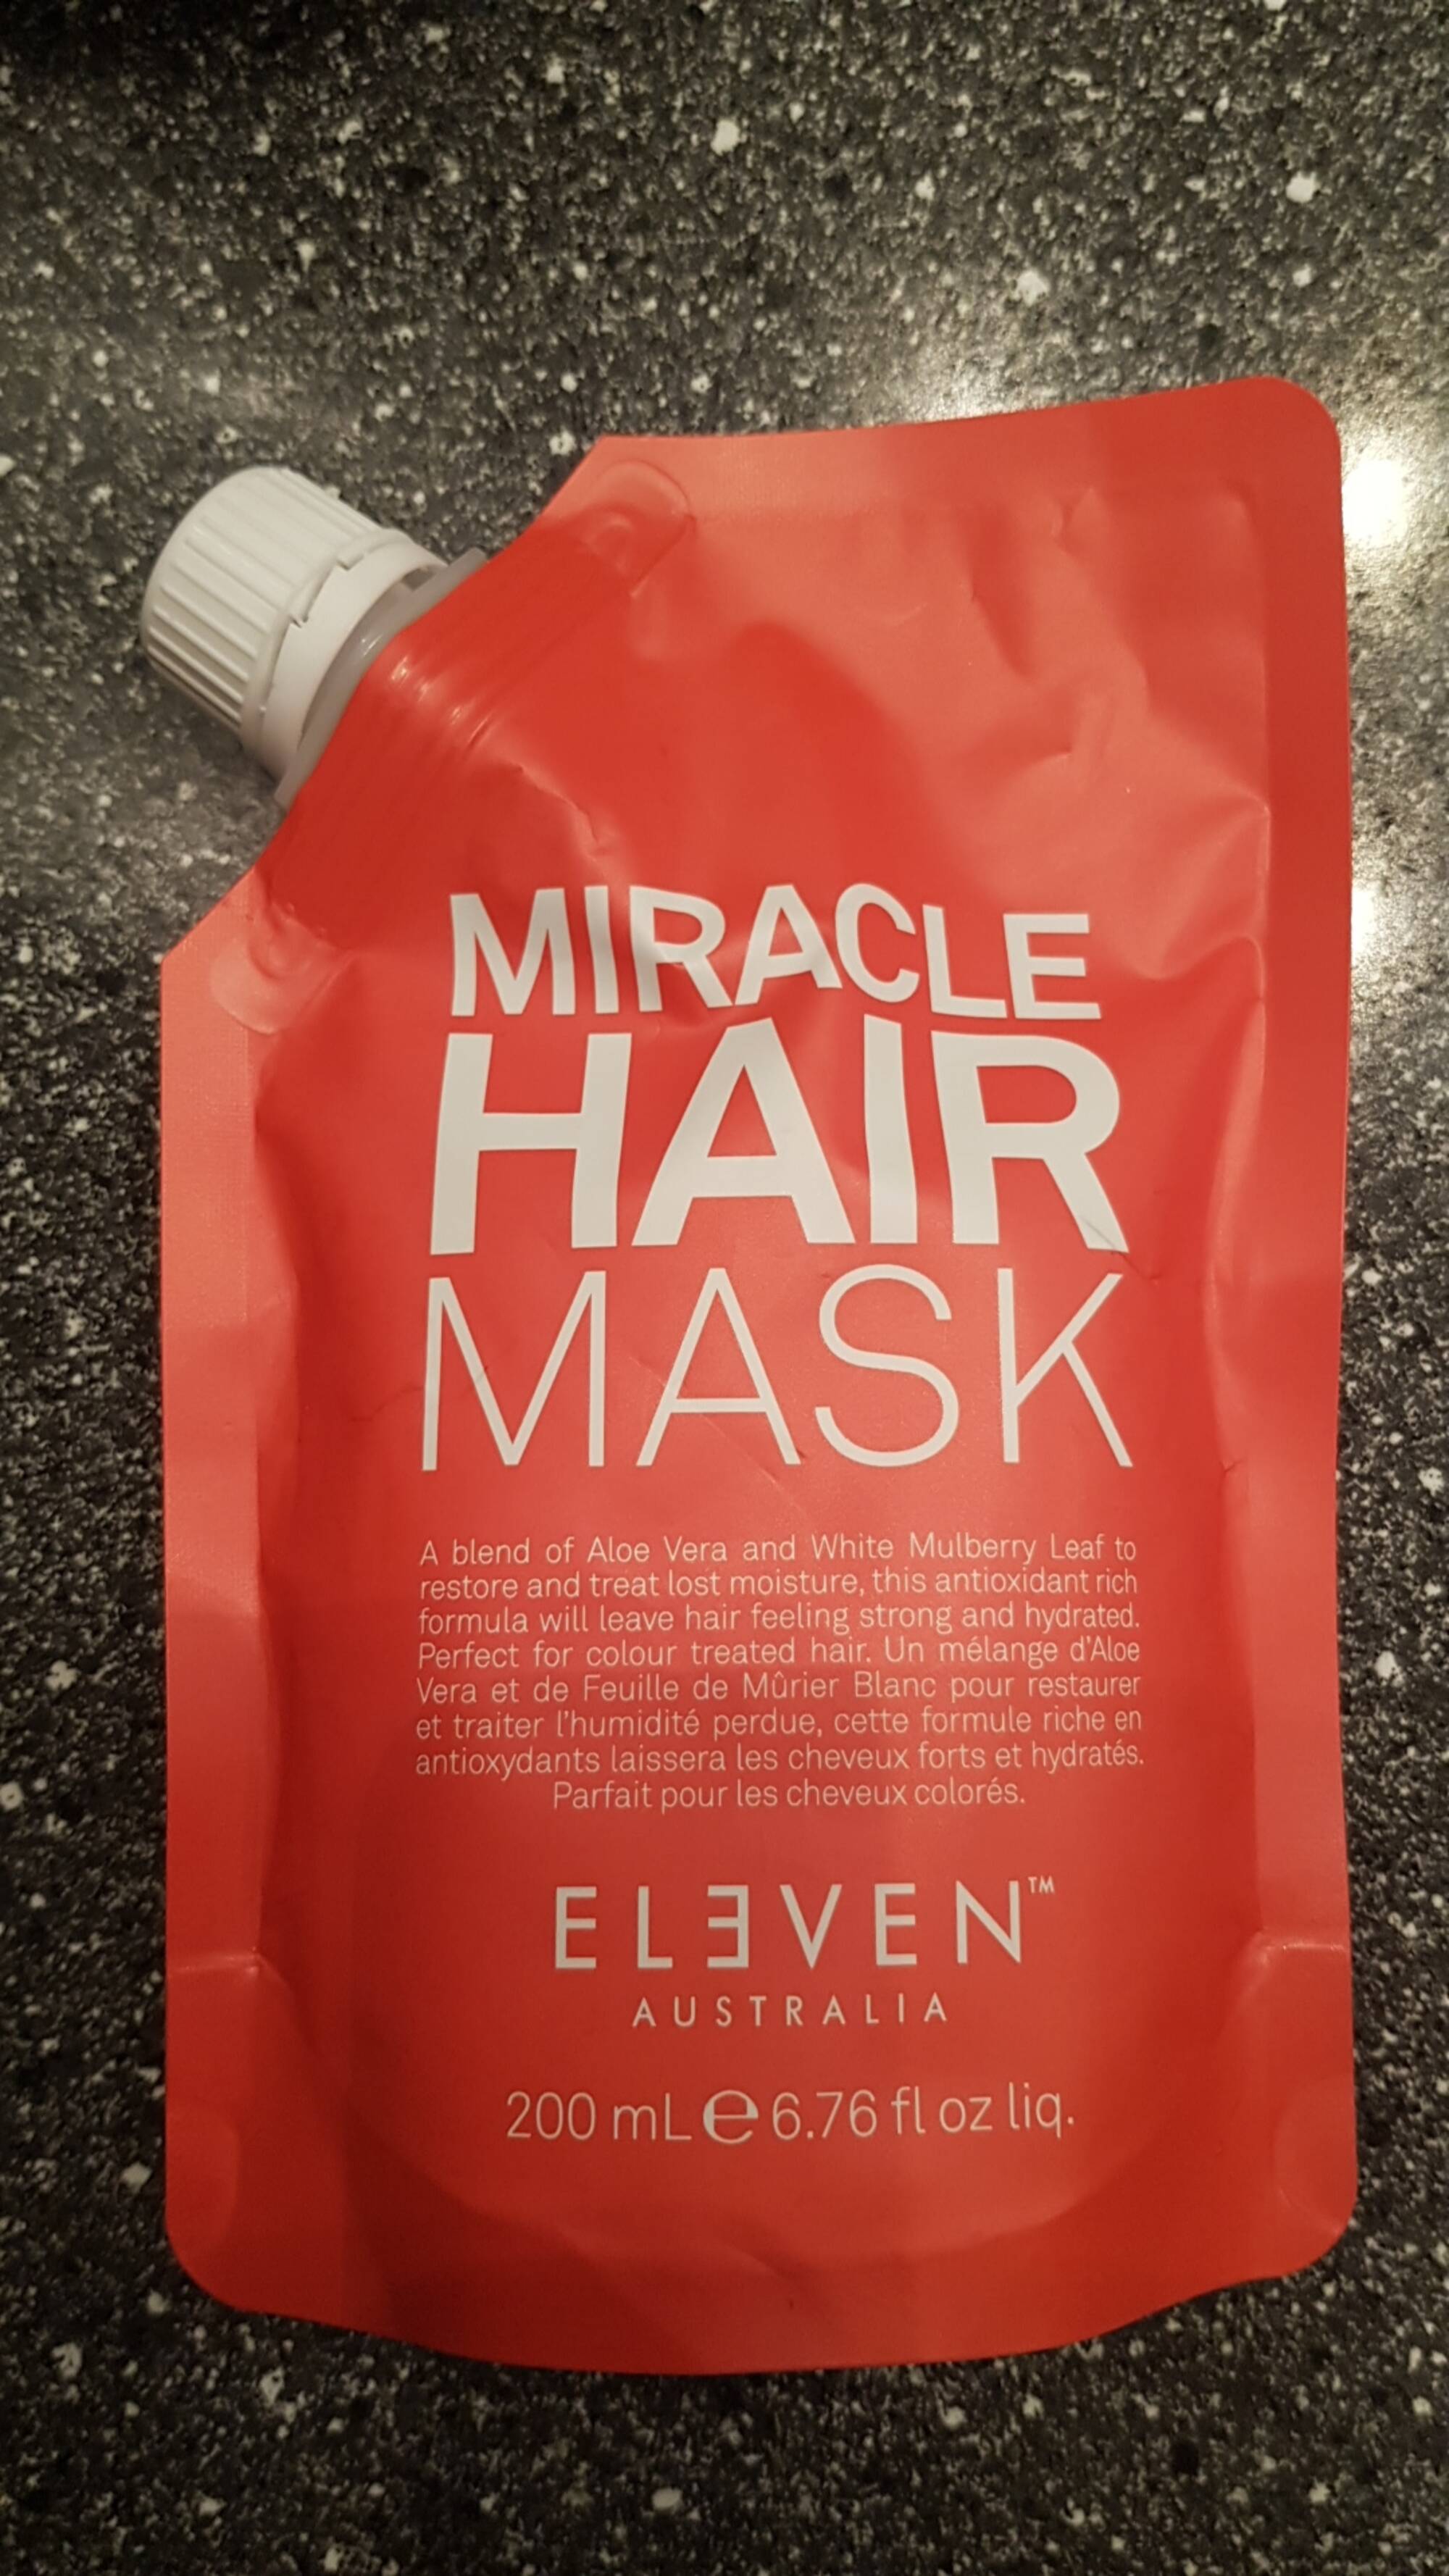 ELEVEN - Miracle hair mask